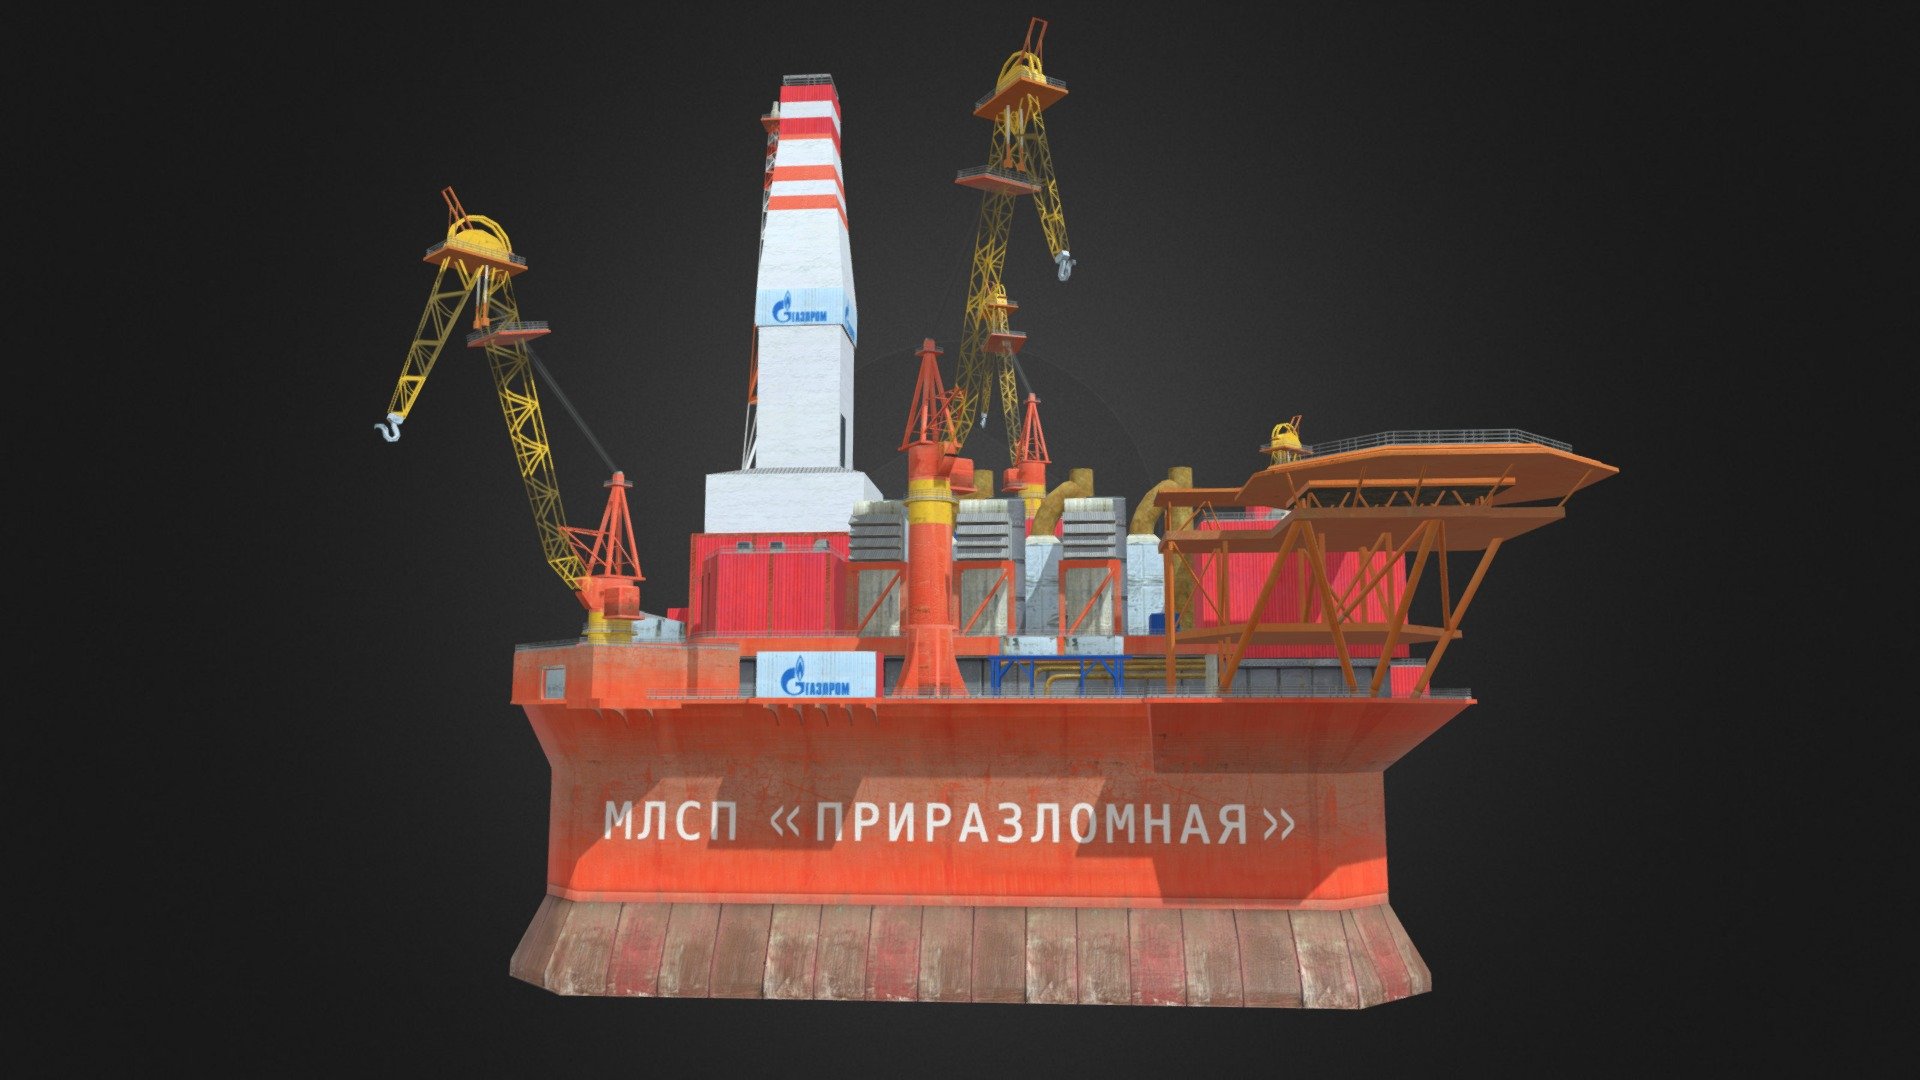 The Prirazlomnaya Offshore Ice-Resistant Stationary Platform (OIRFP) is an oil platform designed for the development of the Prirazlomnoye field in the Pechora Sea. The platform is located 55 km north of the Varandey settlement in the Nenets Autonomous Okrug and 320 km north-east of the city of Naryan-Mar. At present, Prirazlomnaya OIRFP is the only platform that produces oil on the Russian Arctic shelf 3d model